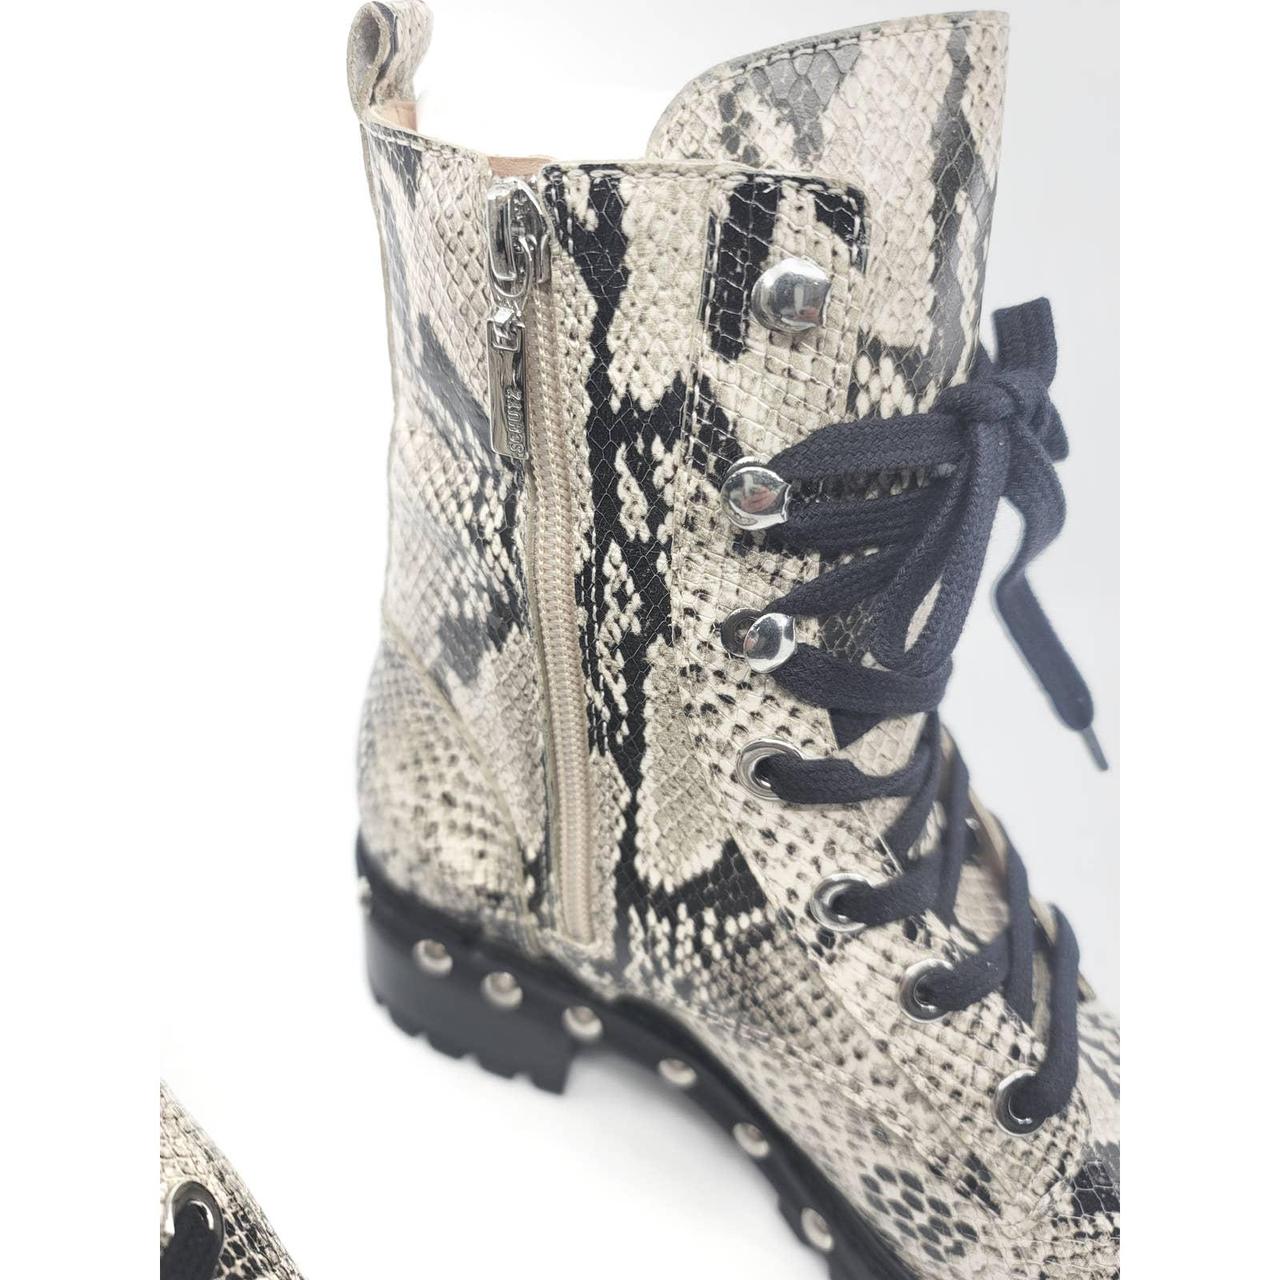 Product Image 2 - NEW
Schutz Andrea Studded Snake-Print Leather